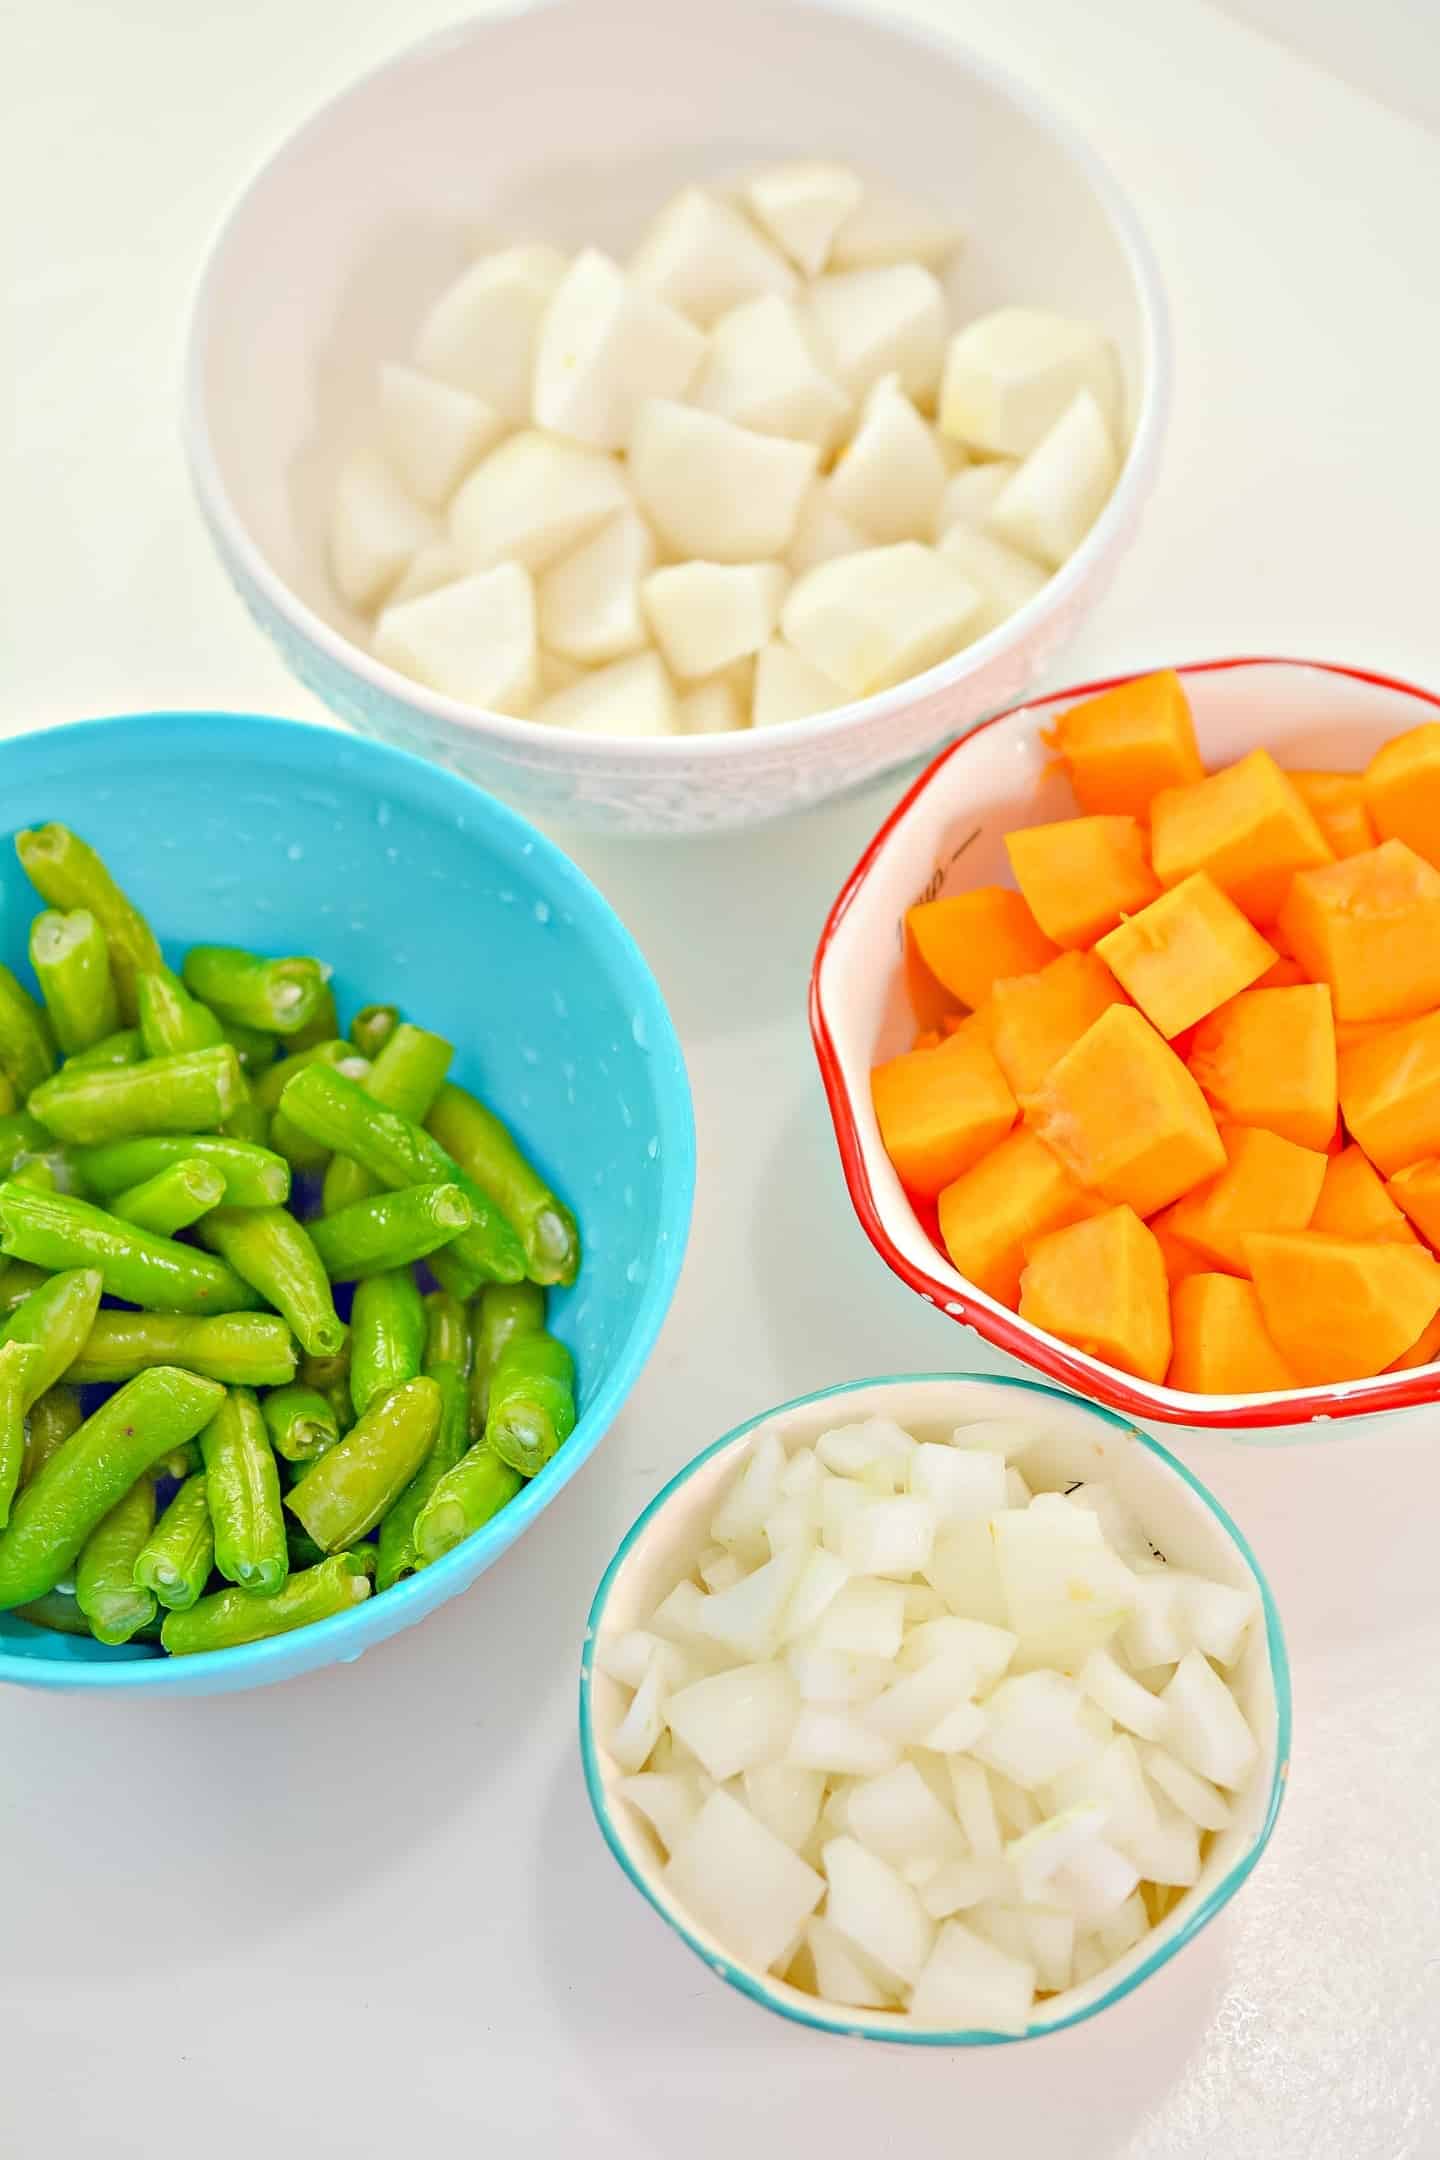 Green beans, pumpkin squash in cubes, diced onion and turnips in bowls